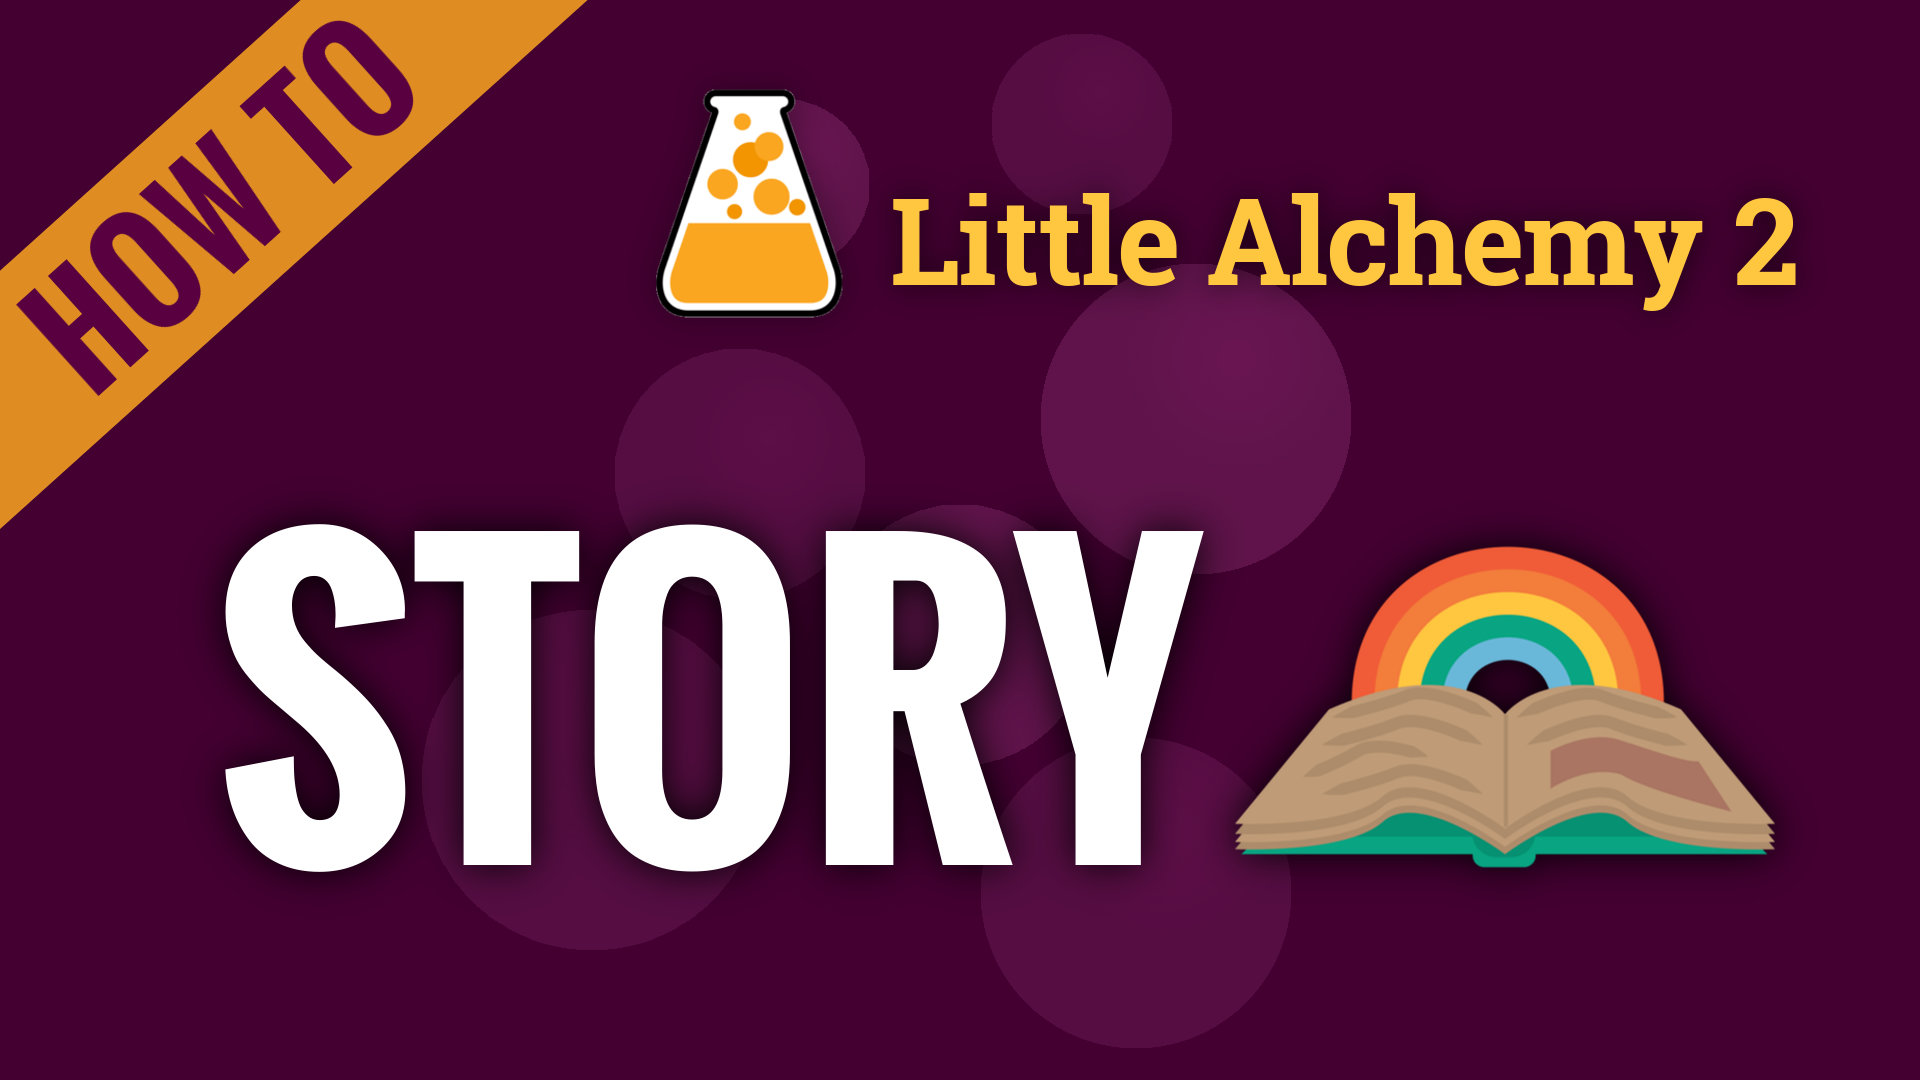 How To Make Story In Little Alchemy 2